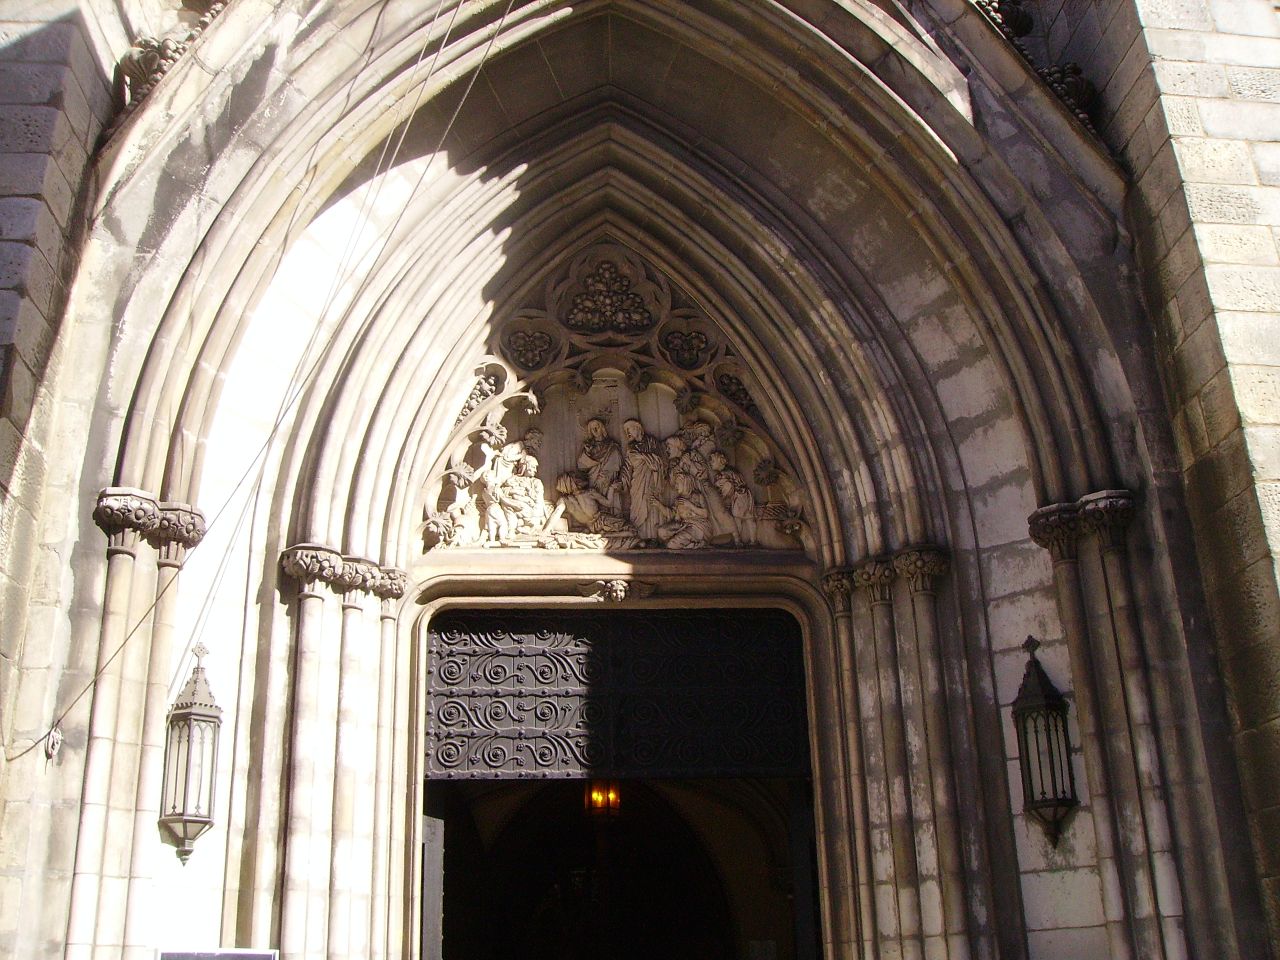 an ornate doorway and a sign at the end